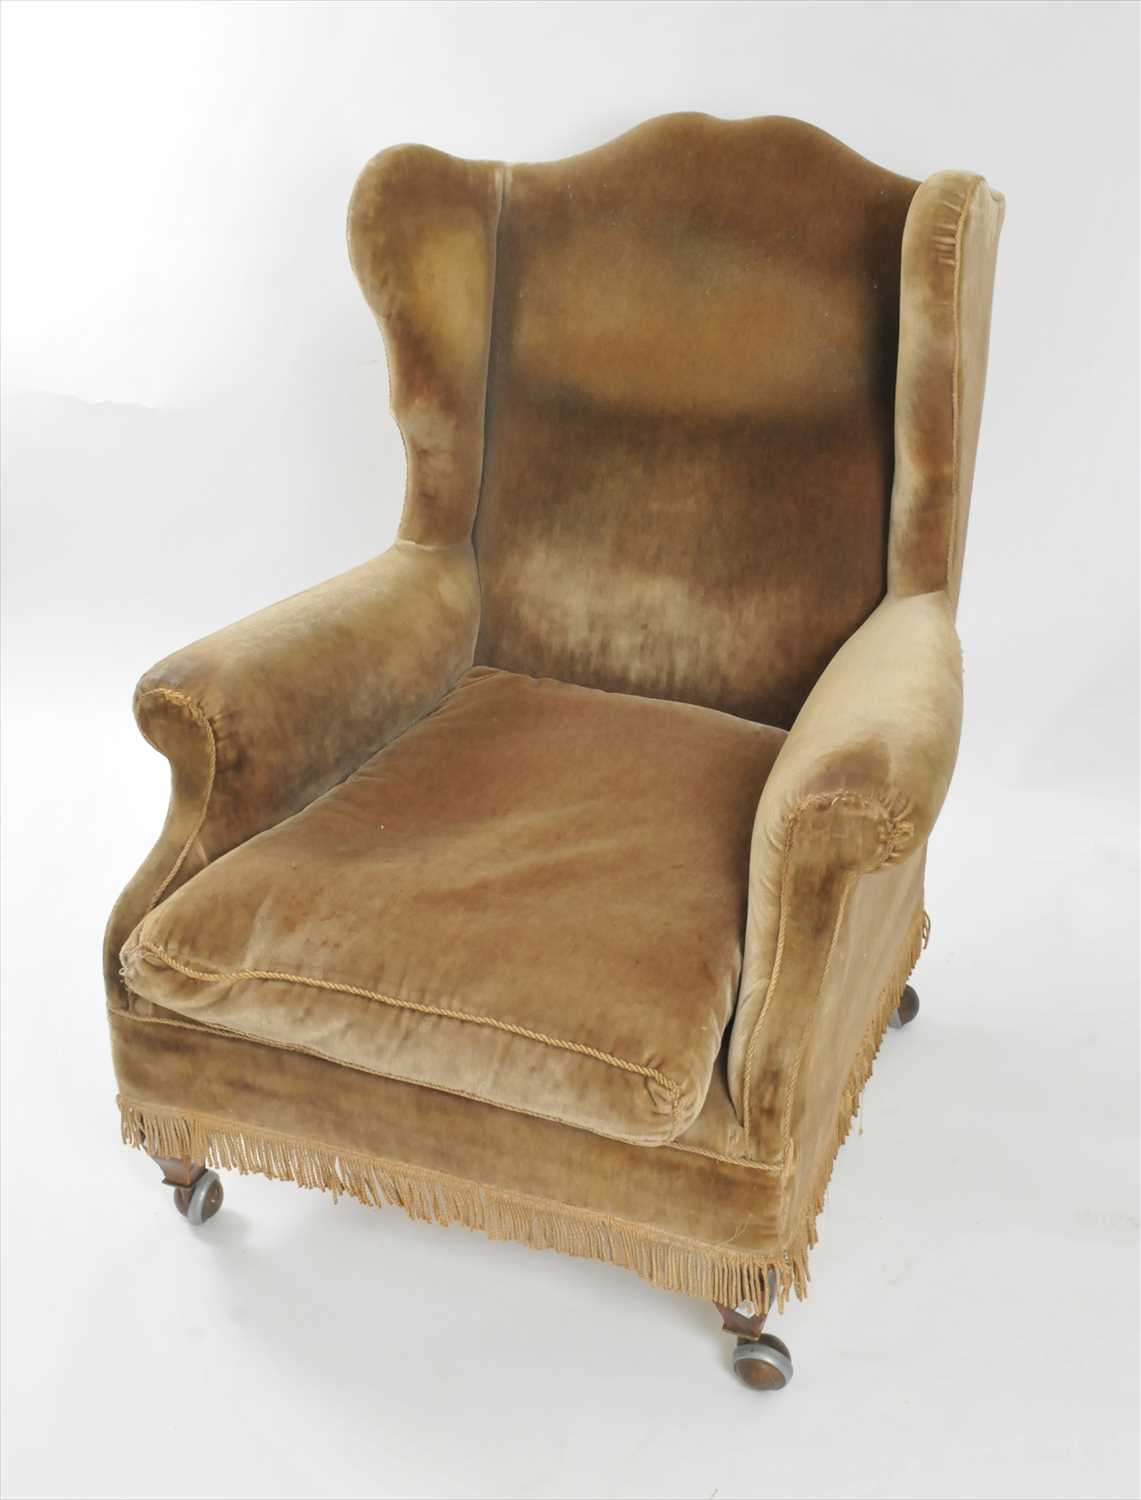 A 19th century upholstered wing armchair - Image 2 of 3